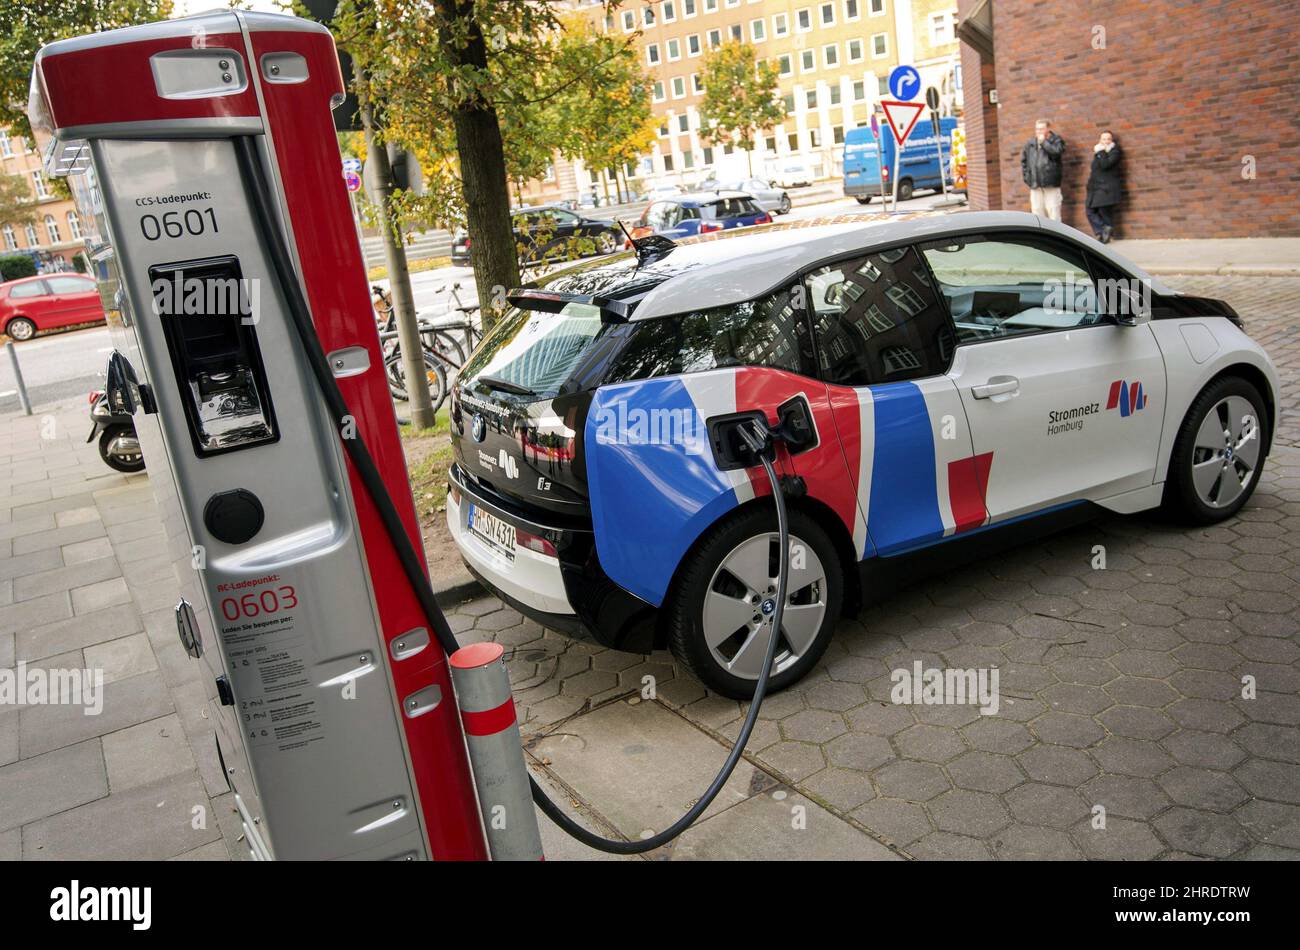 FILE - In this Wednesday, Oct. 18, 2017 photo a car is connected to a charging station for electric vehicles in Hamburg, Germany. A Canadian energy think tank says the world is less than a decade away from the tipping point at which electric cars will cost the same as conventional gas-powered vehicles. THE CANADIAN PRESS/Daniel Bockwoldt/dpa via AP, File) Stock Photo